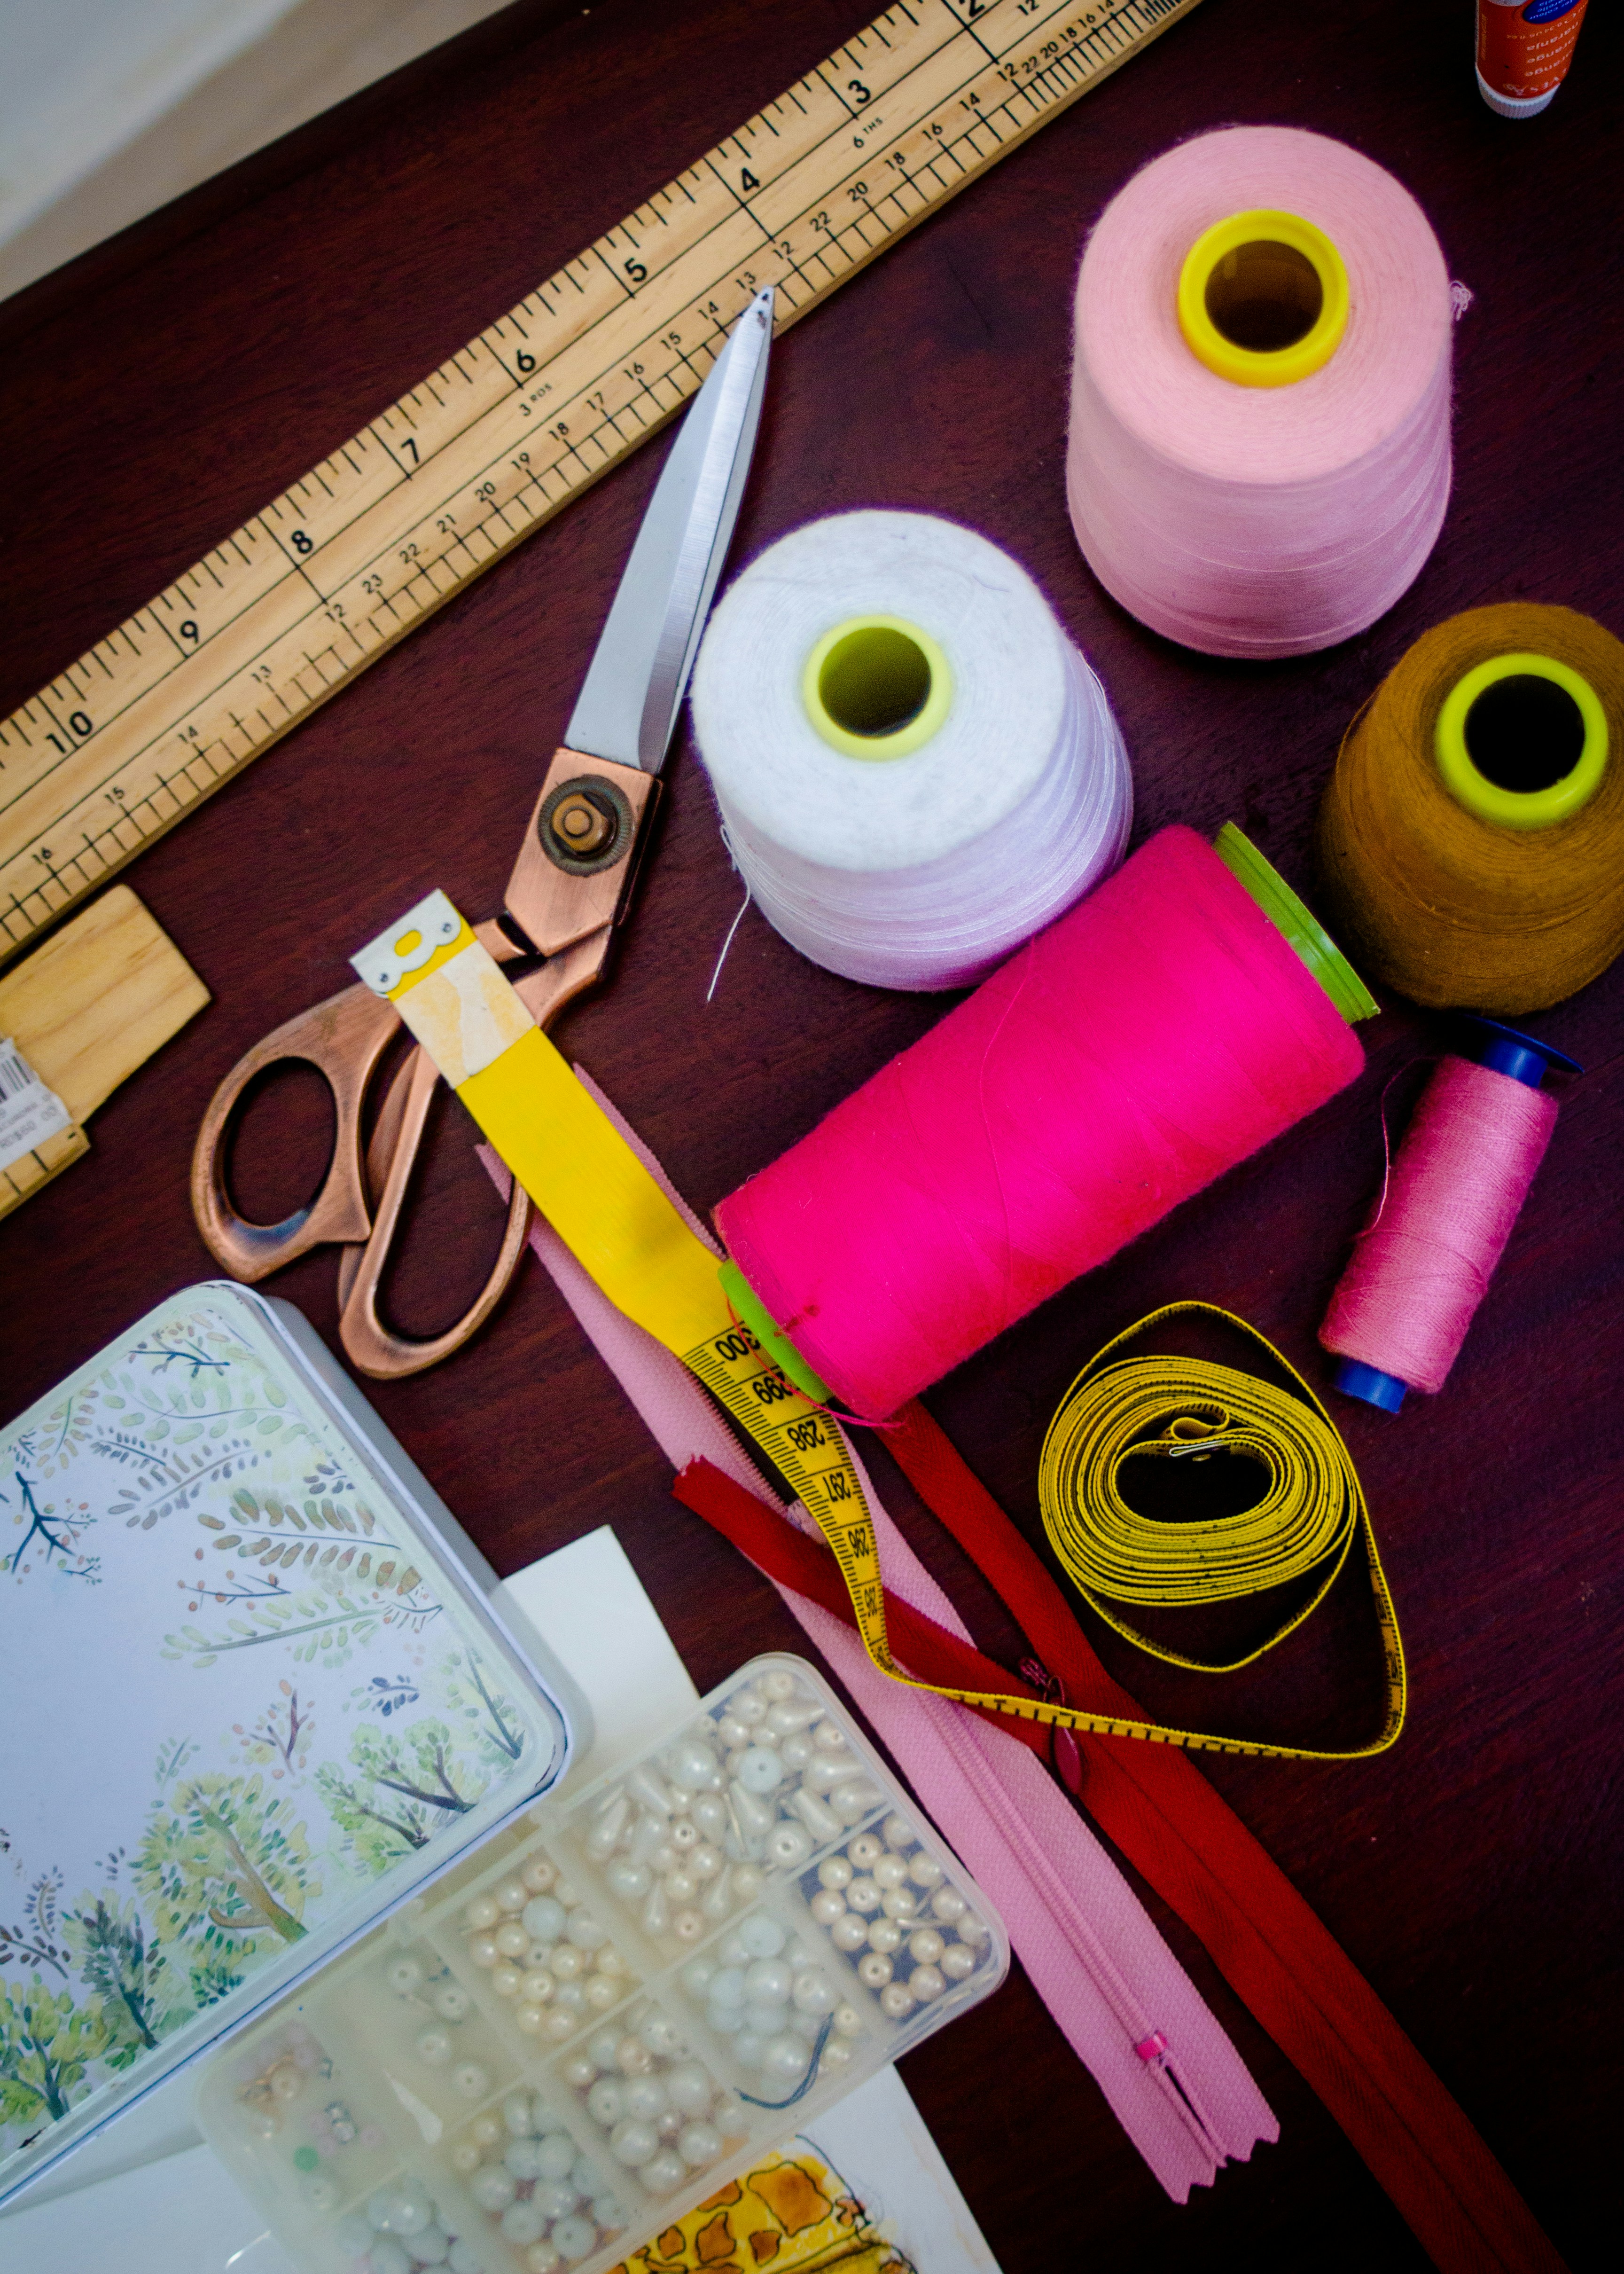  The image shows sewing threads, scissors, measuring tape, and a zipper laid out on a table.